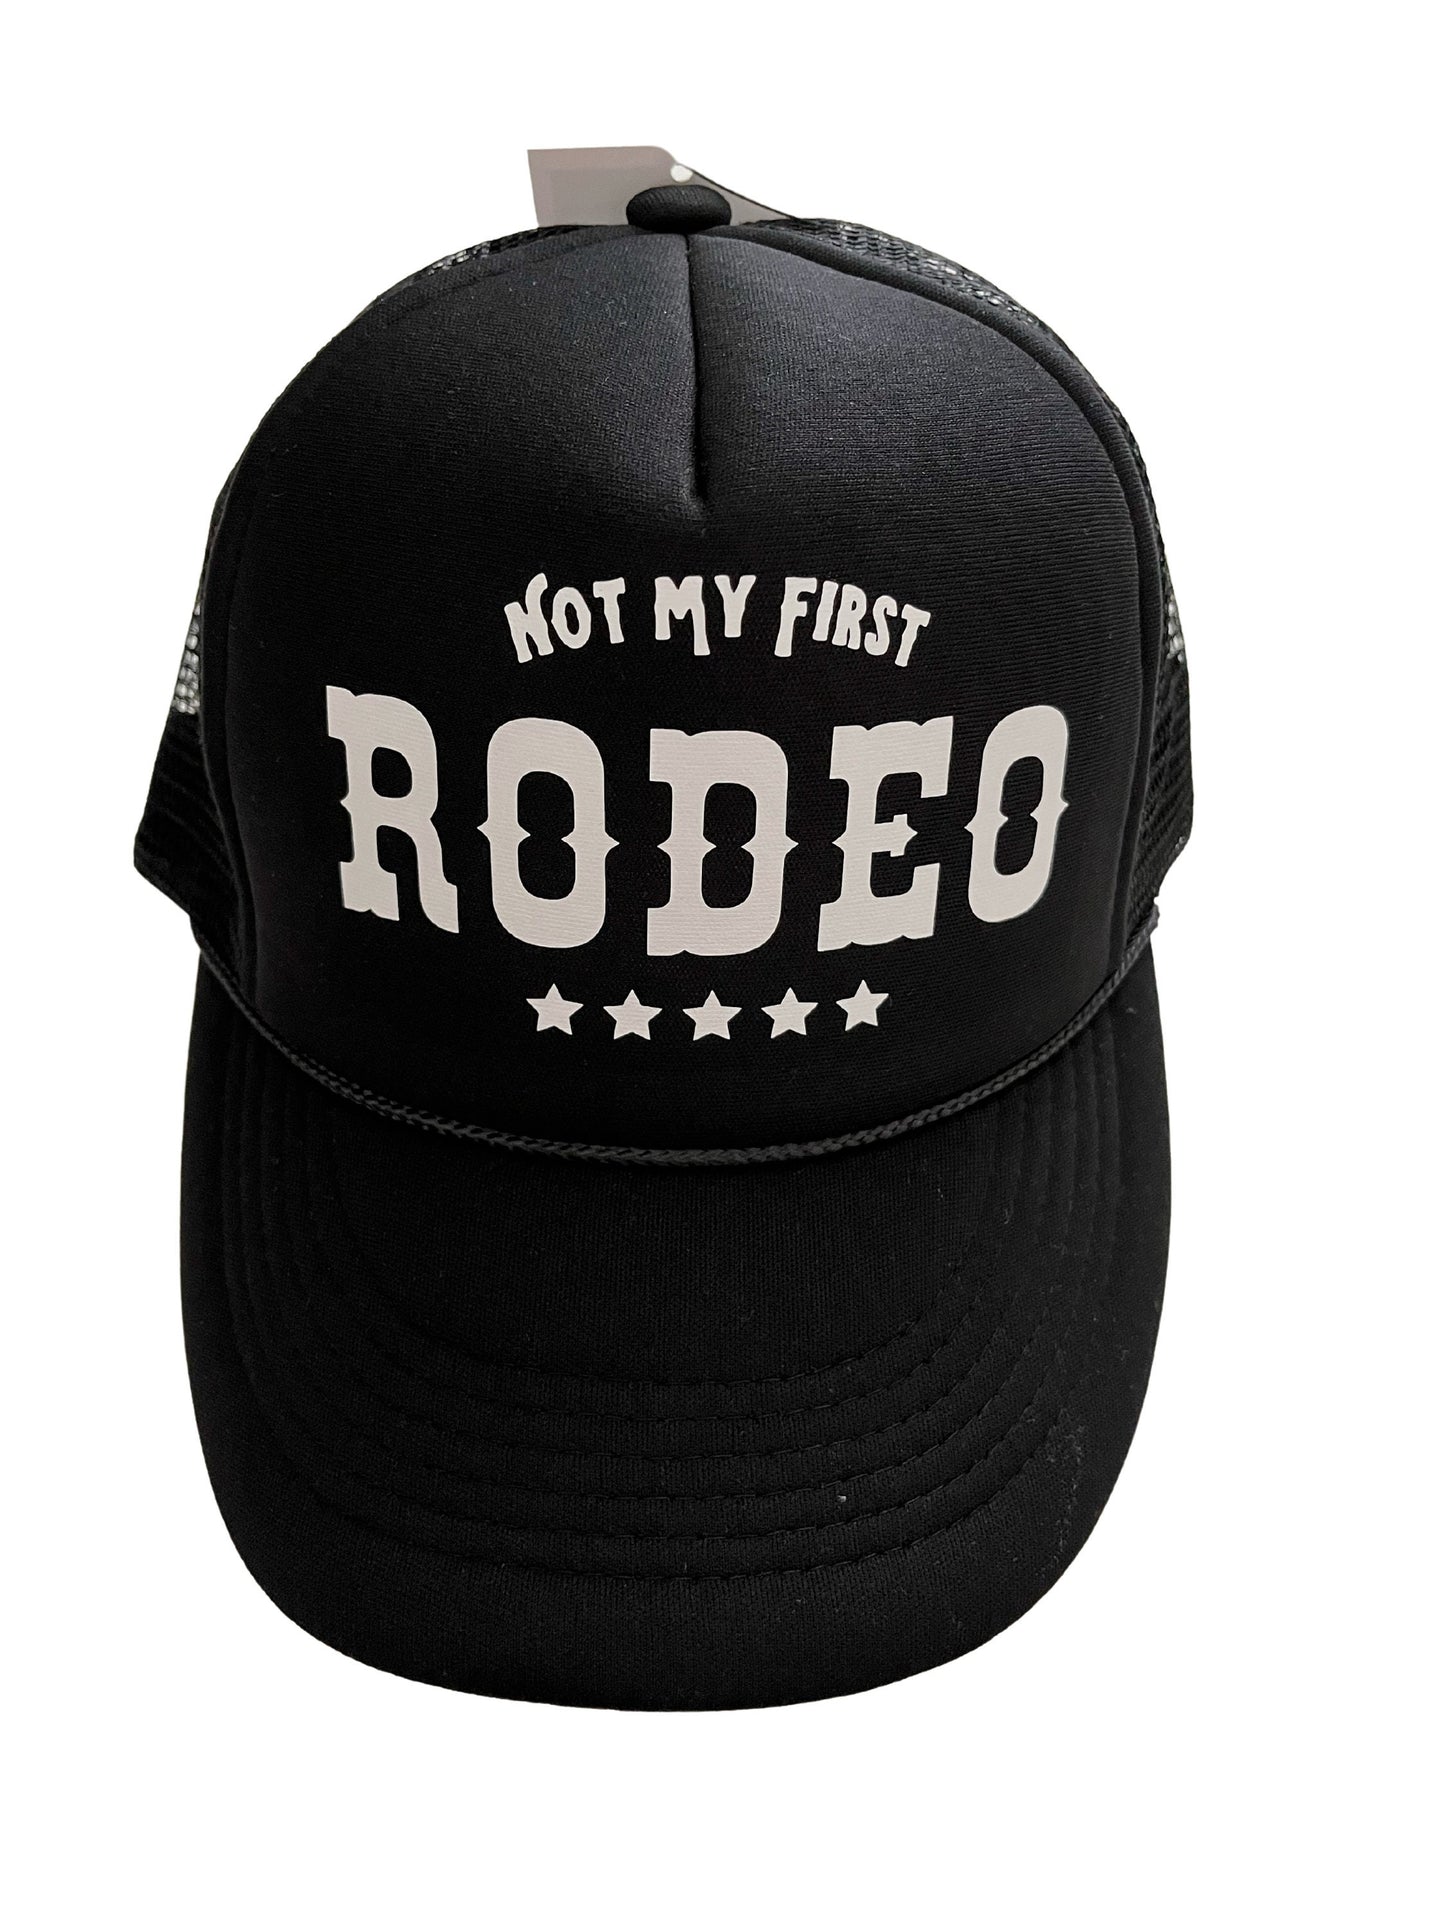 Cowboy Trucker Hat, Cute Trucker Hat, Women's Hats, Rodeo Hat, Western Hat, Snapback, Cowgirl Hat, Vacation Hat, Not My First Rodeo, Rodeo